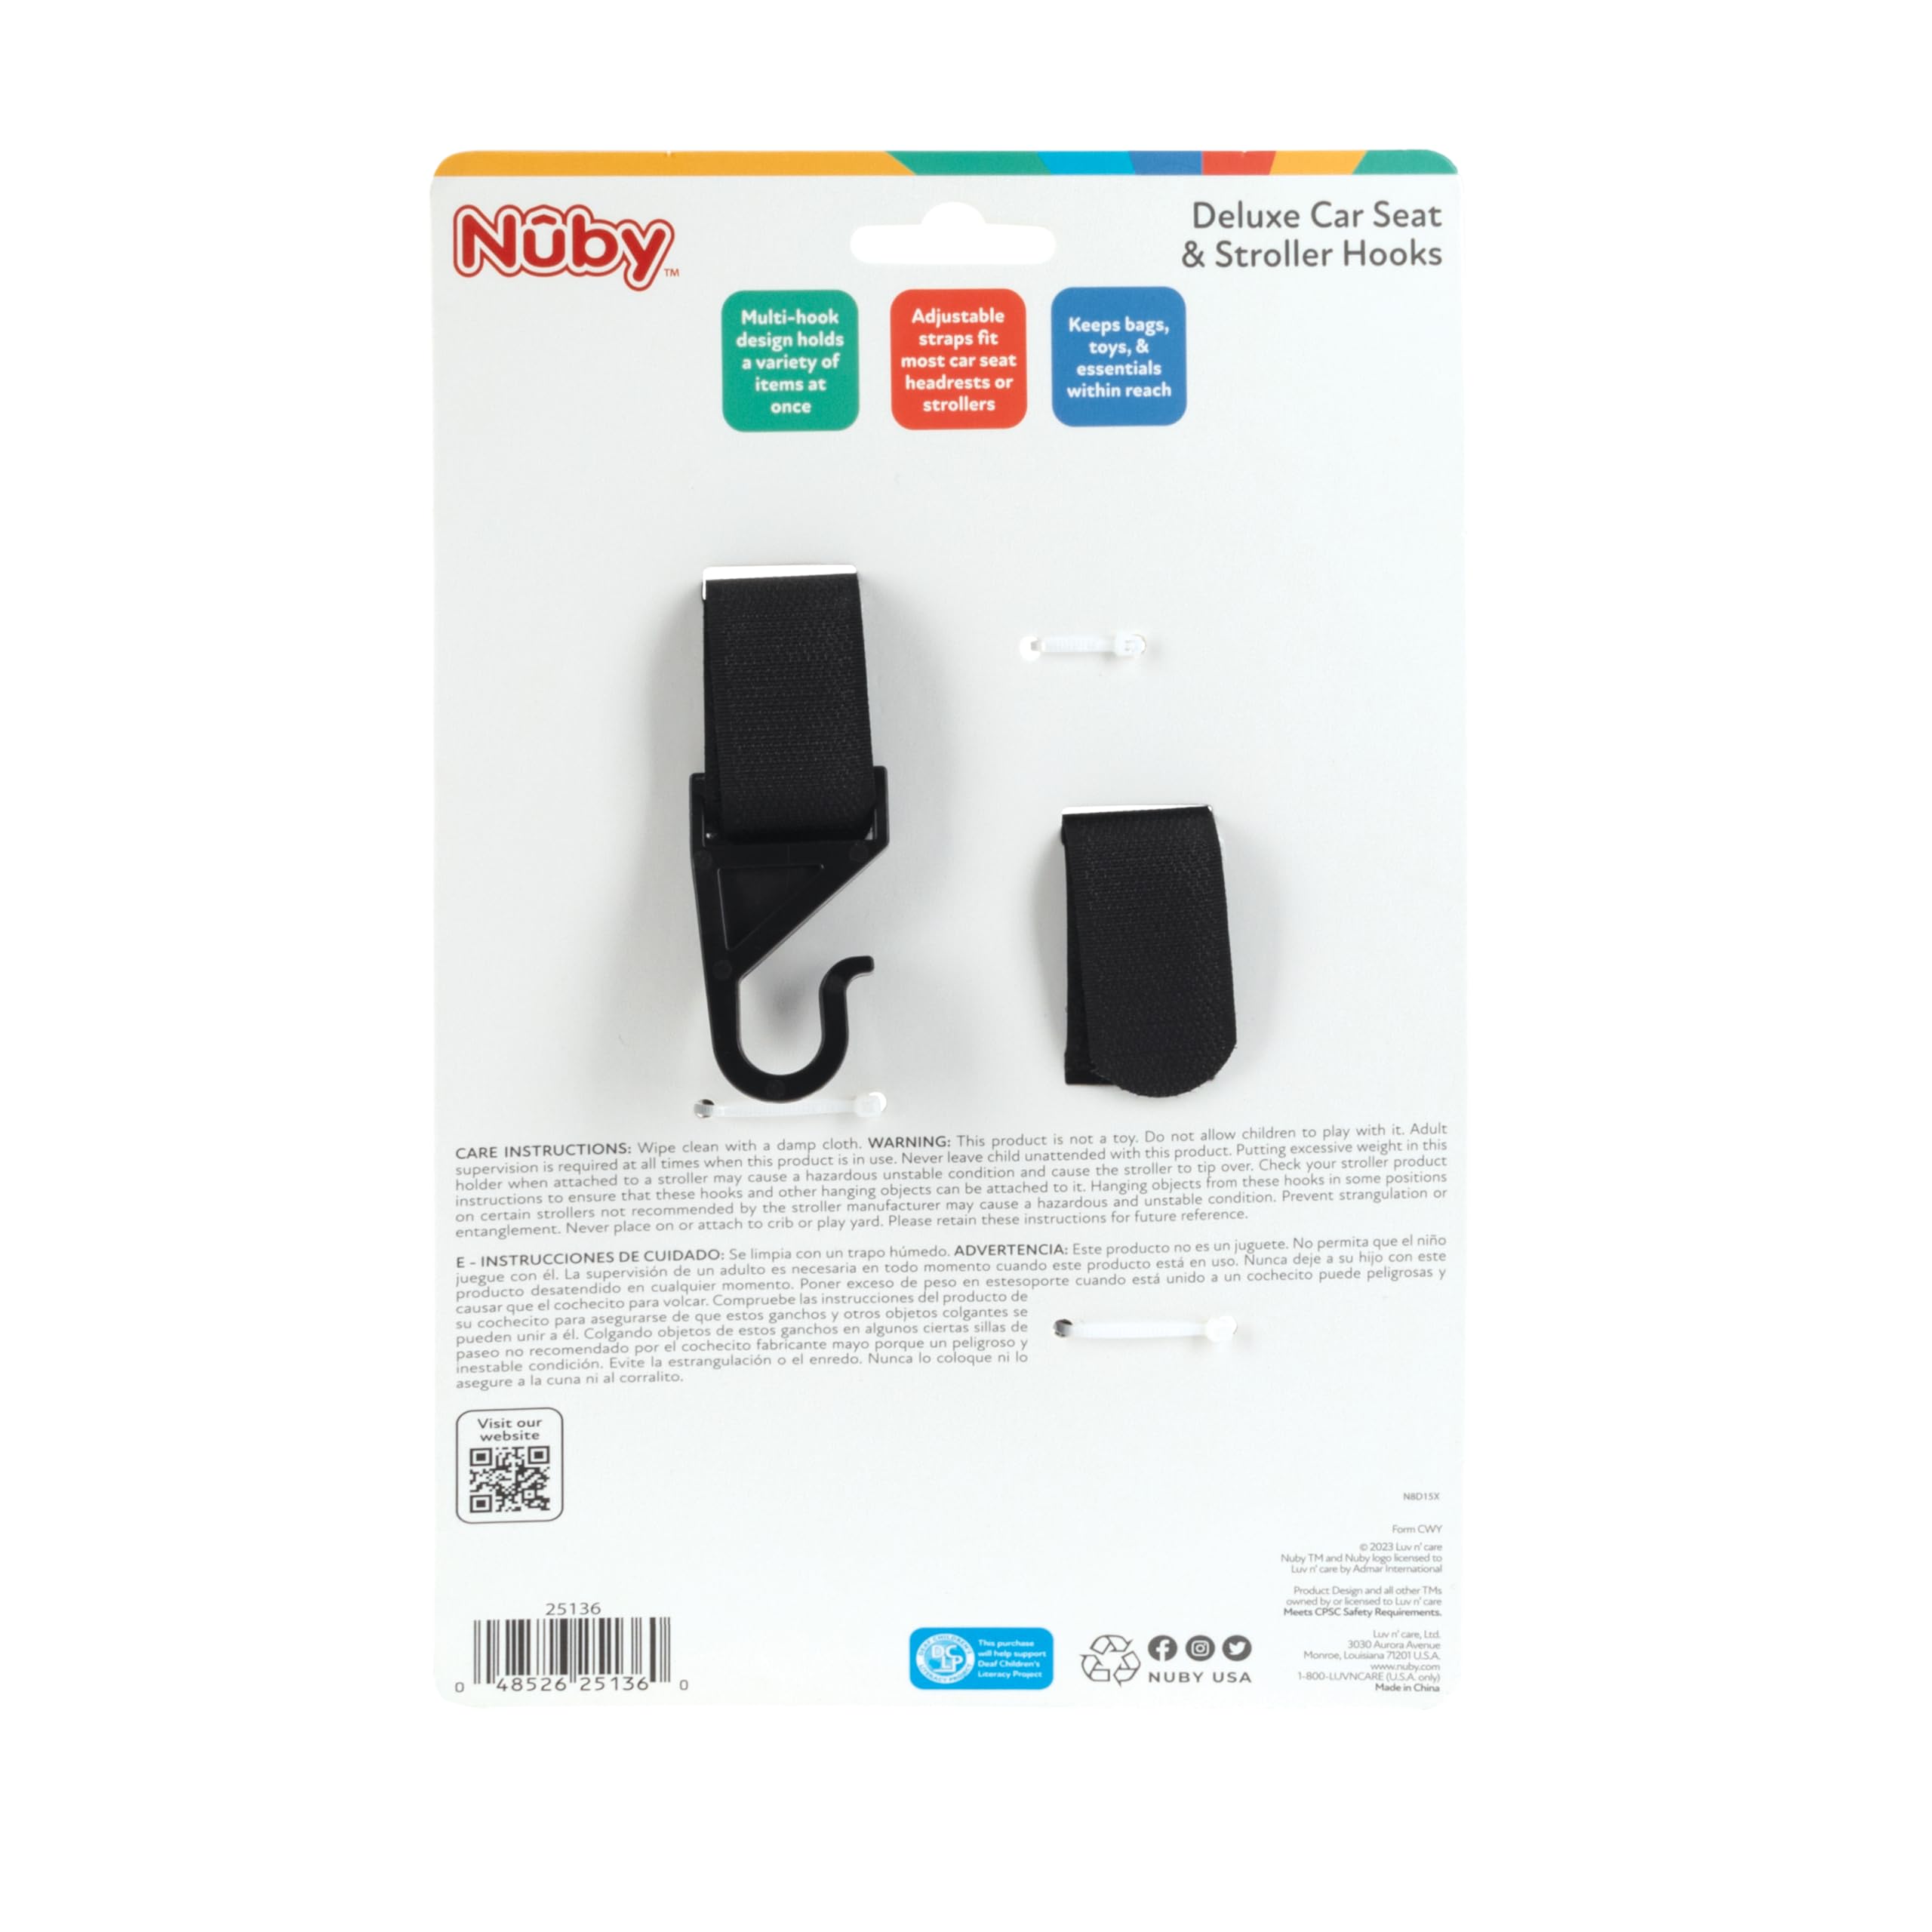 Nuby 2-in-1 Deluxe Adjustable Baby Stroller & Car Seat Hooks for Hanging Bags, Toys- Hang or Remove Items from Hooks with one Hand/ 2 Pack – 8 Hooks Total, Black